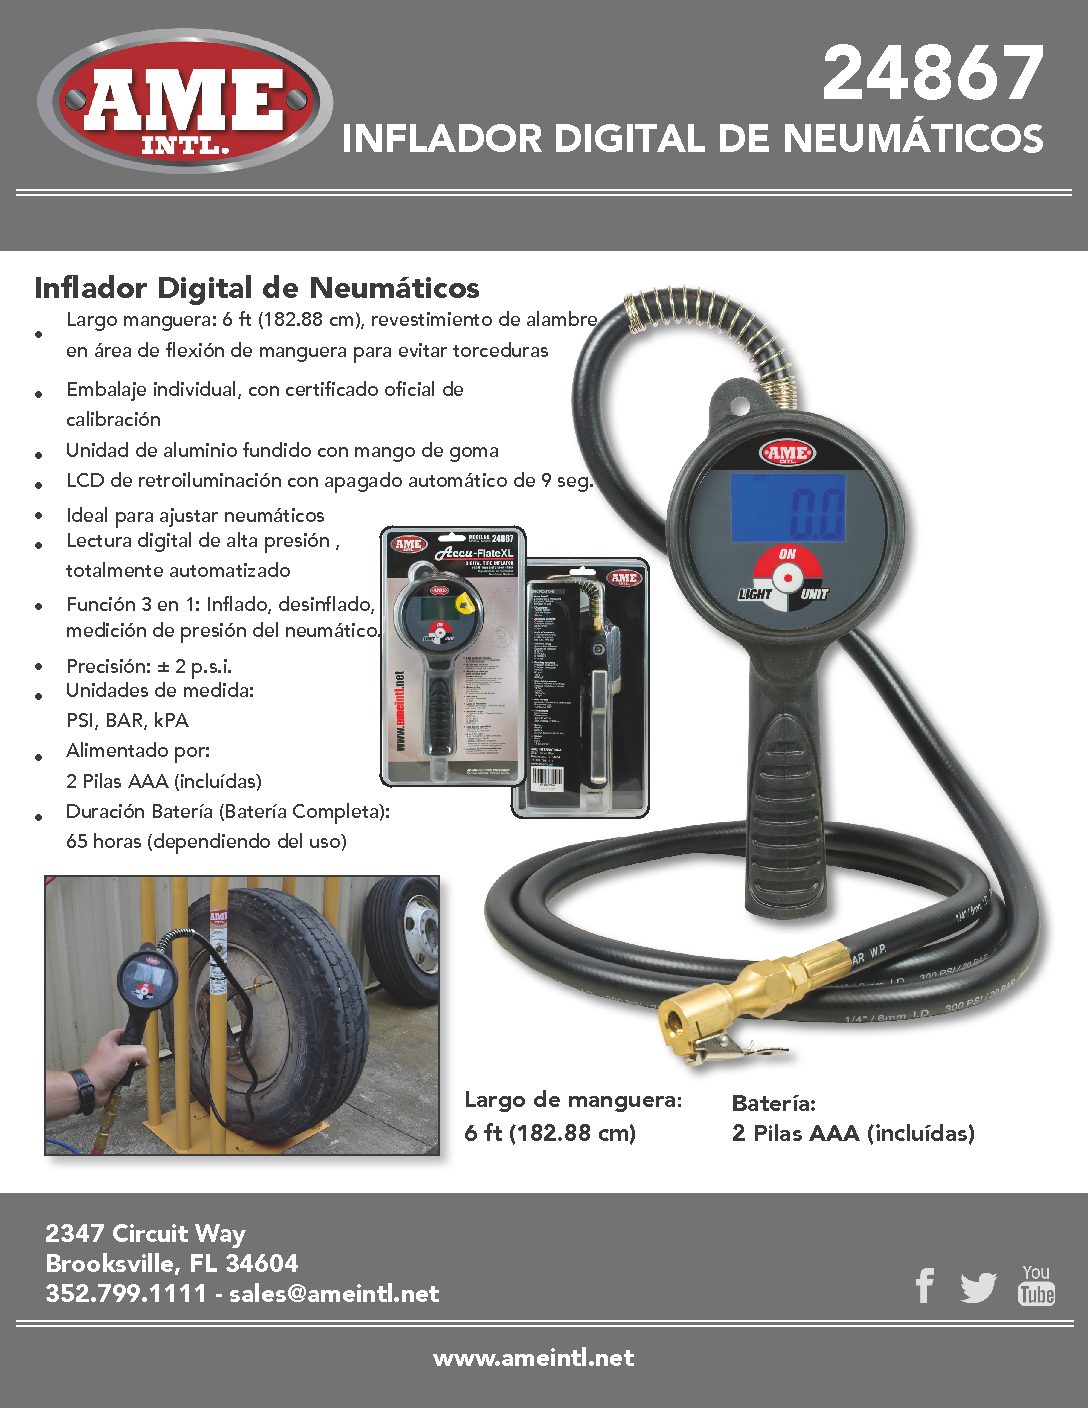 24867 Digital Tire Inflator Product Flyer_Spanish - AME INTL